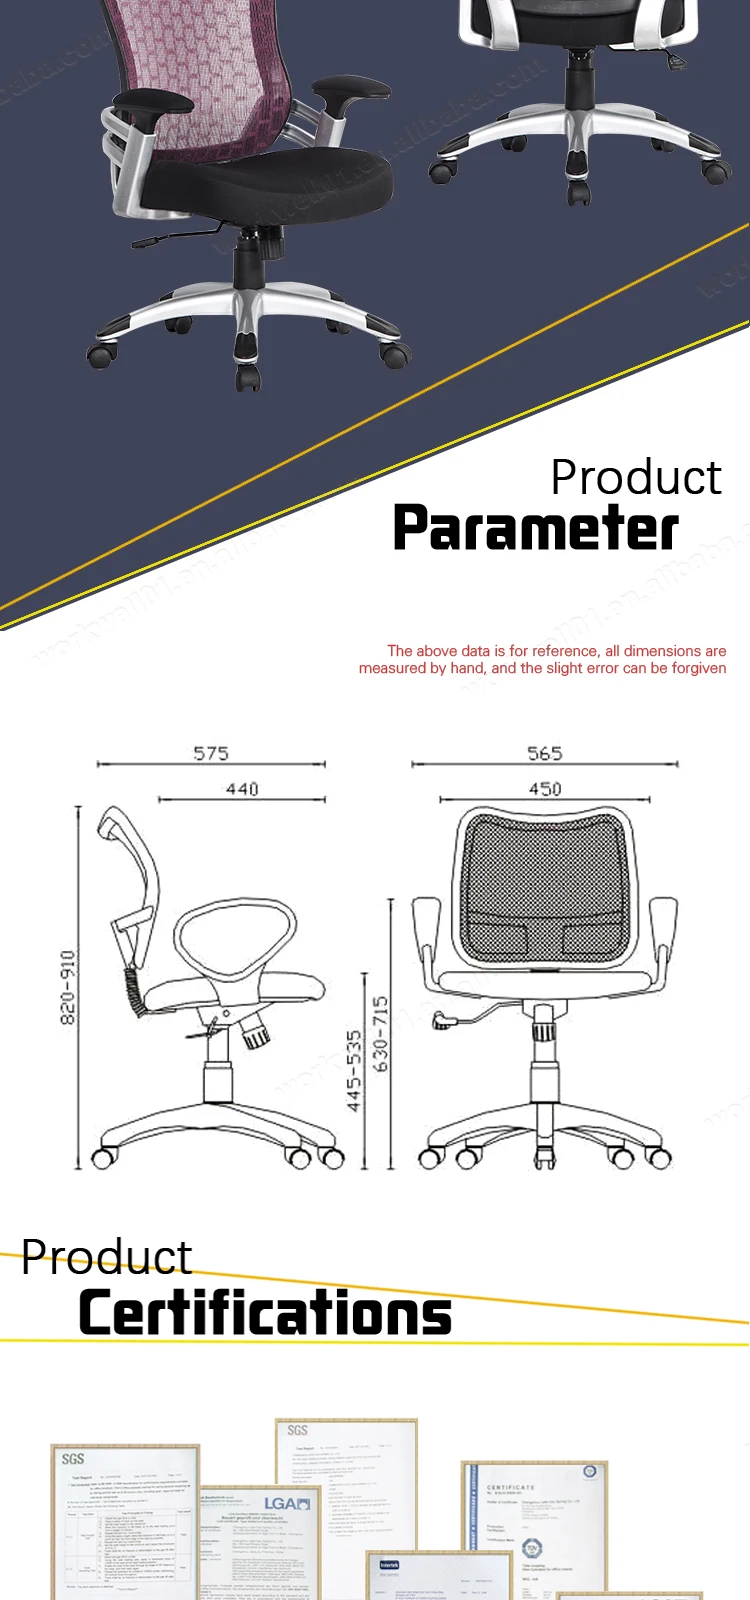 2020 Office aluminum mesh chair with casters 2020